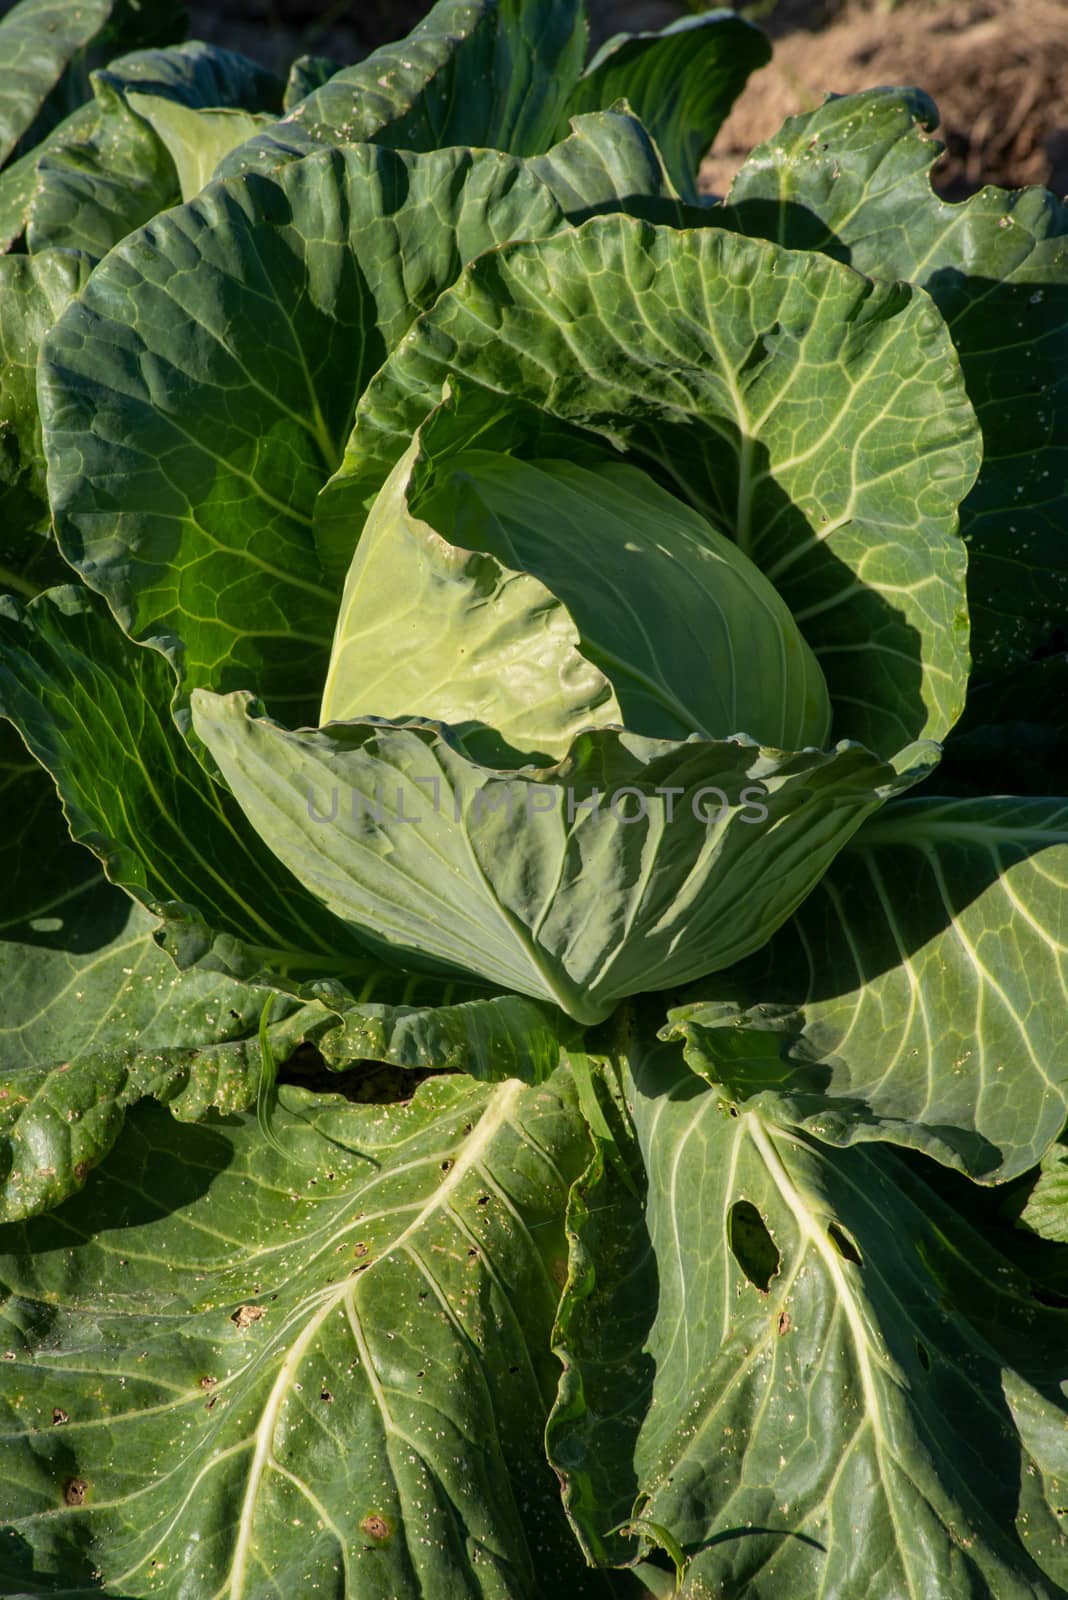 Cabbage growing on an organic vegetable farm by marysalen